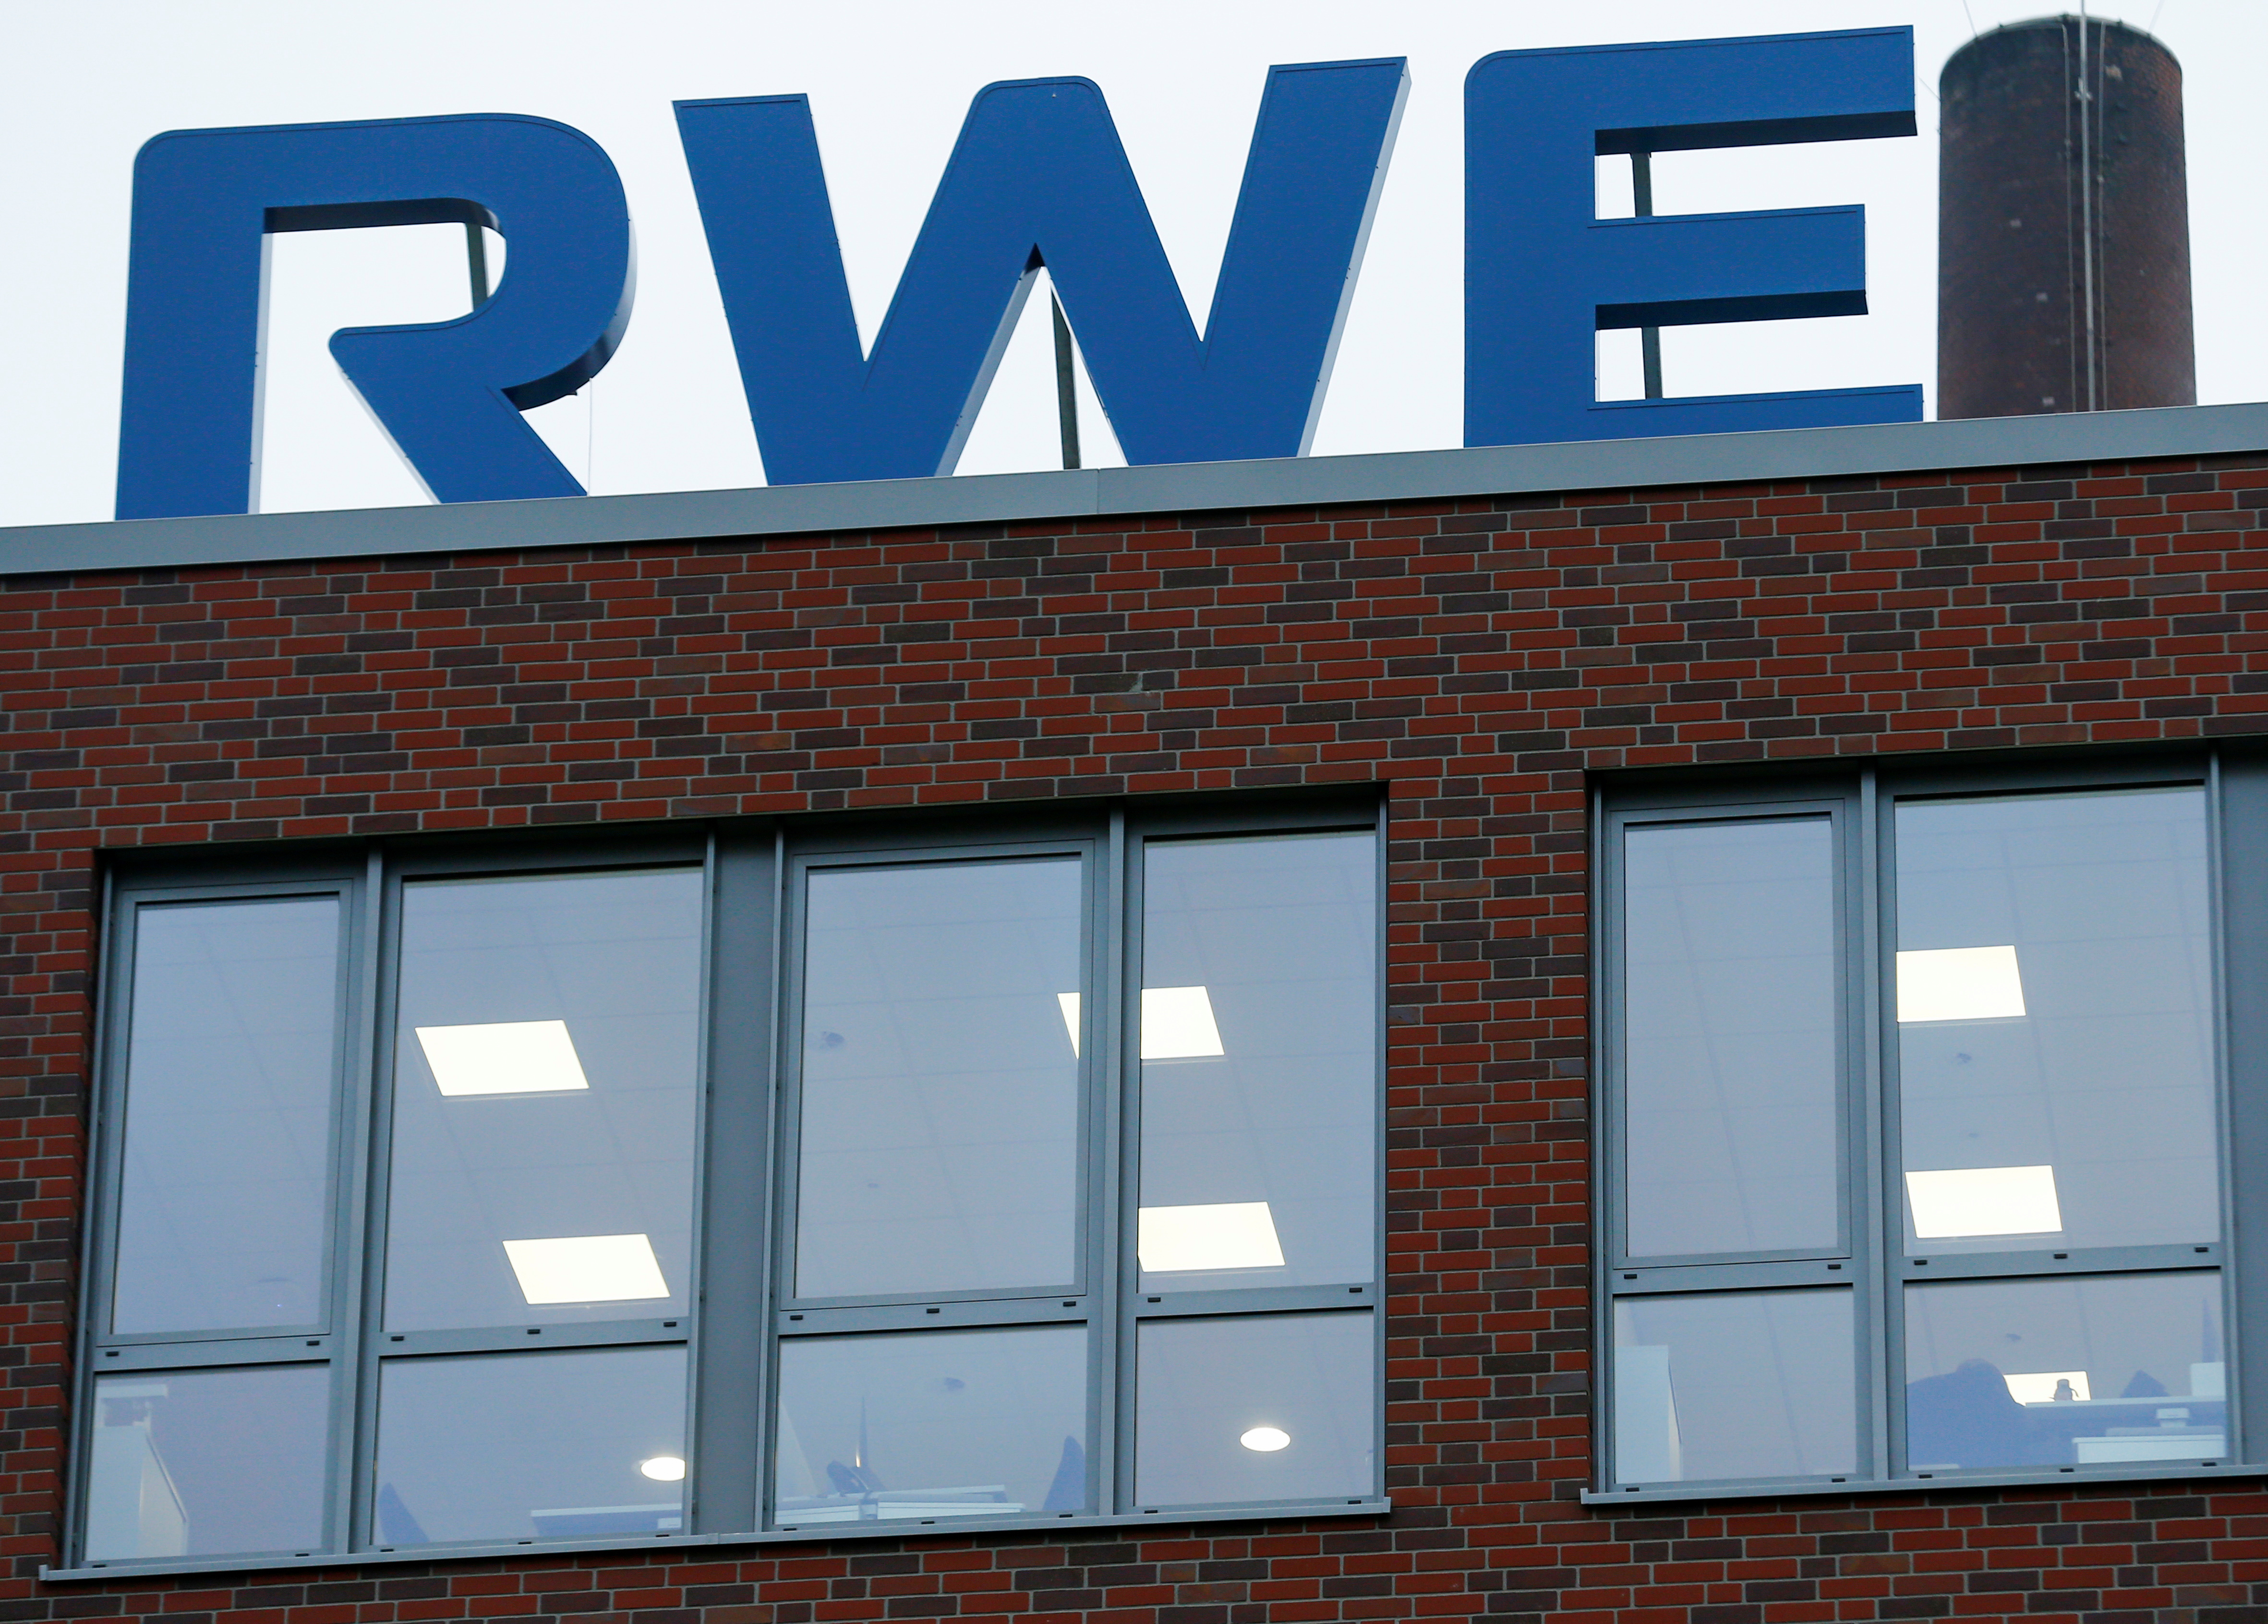 The logo of the German power supplier RWE is pictured at the RWE headquarters in Essen, Germany, November 15, 2021. REUTERS/Thilo Schmuelgen